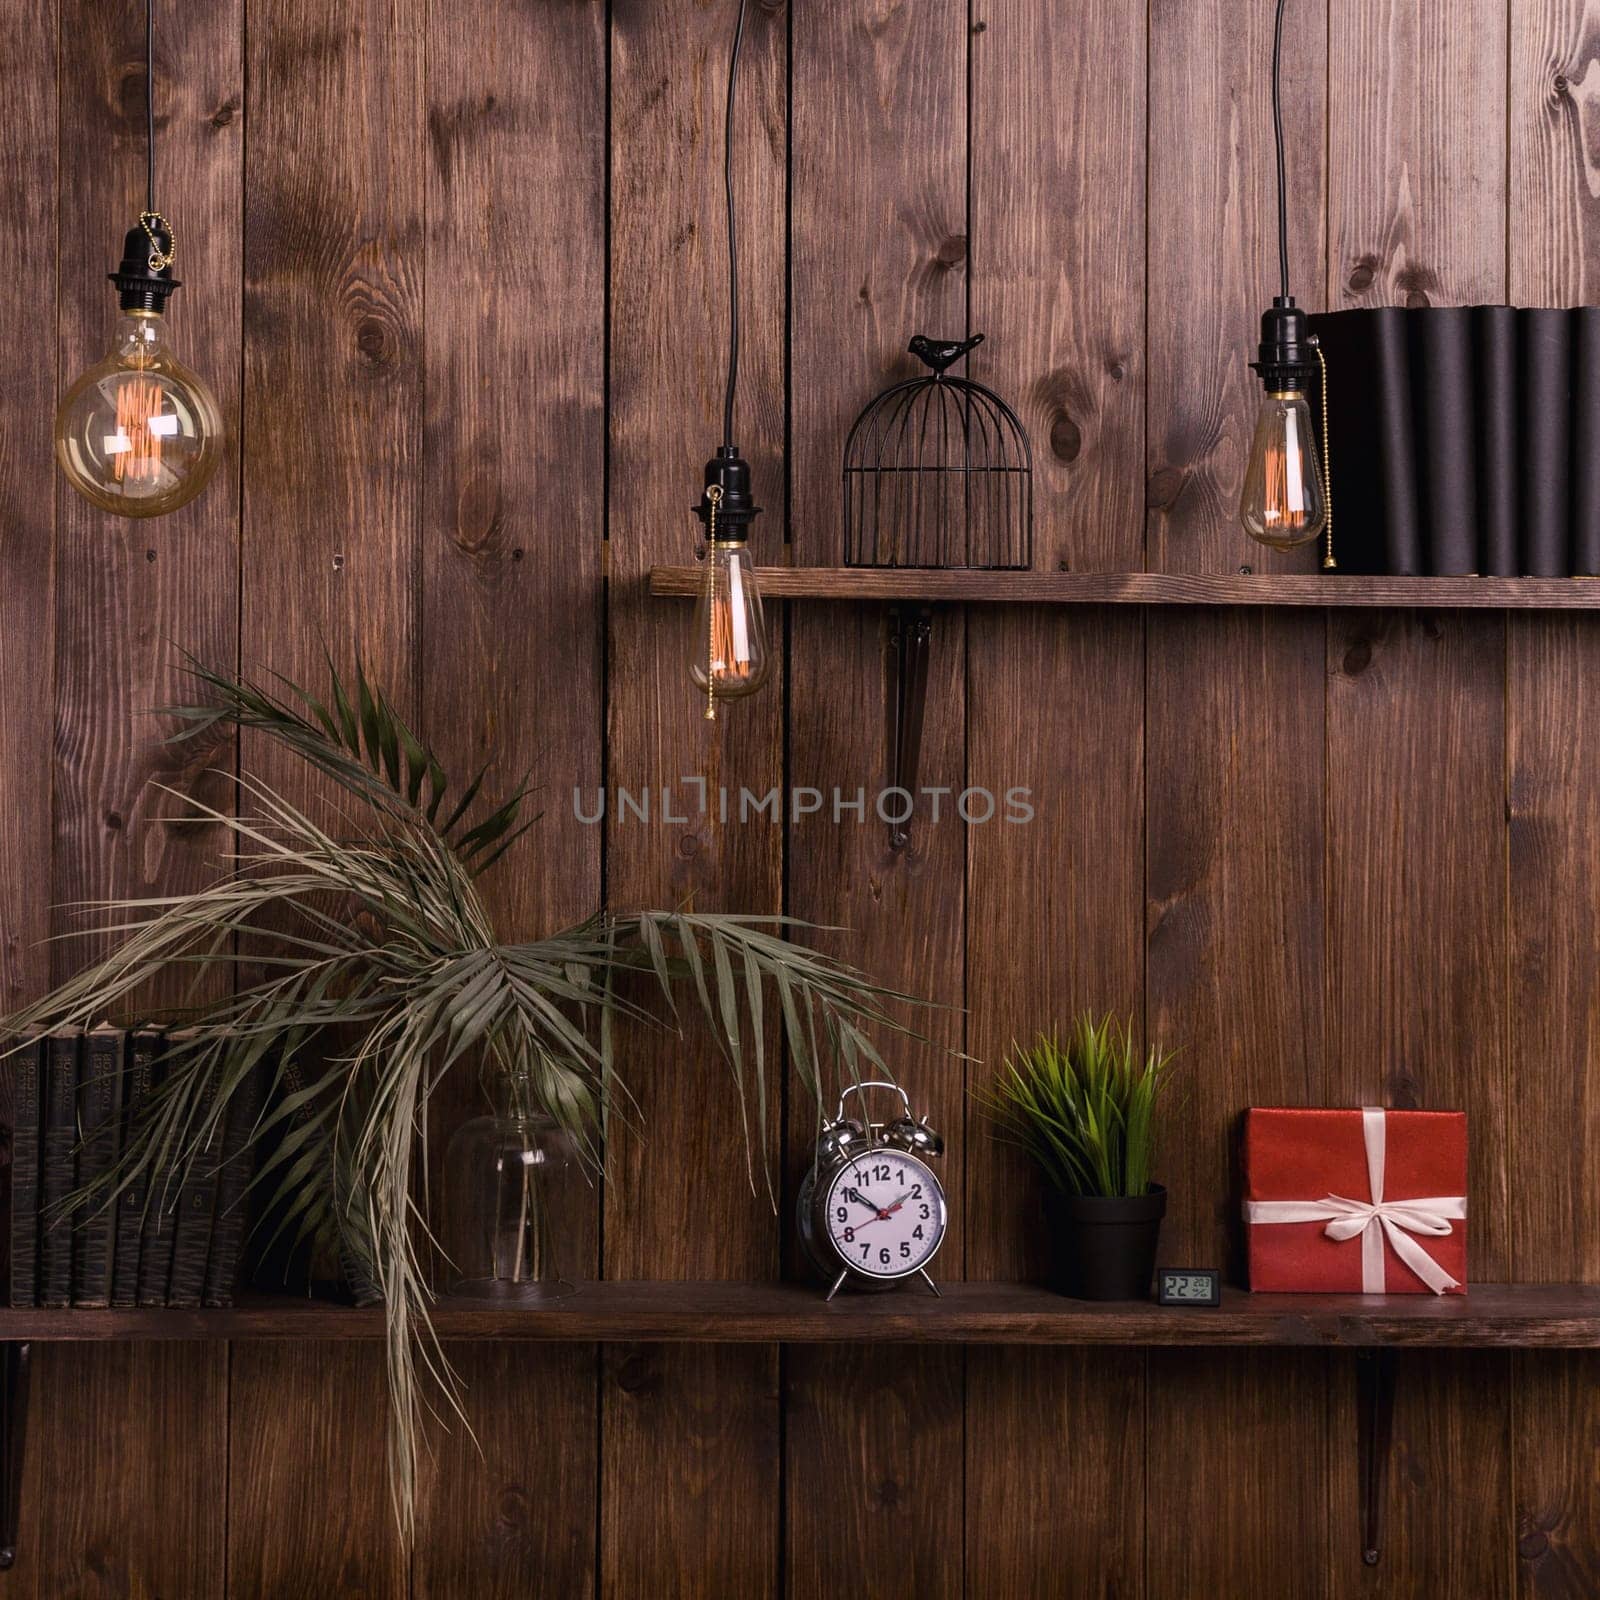 Stylish wooden wall with shelves in mahogany loft style. by zartarn